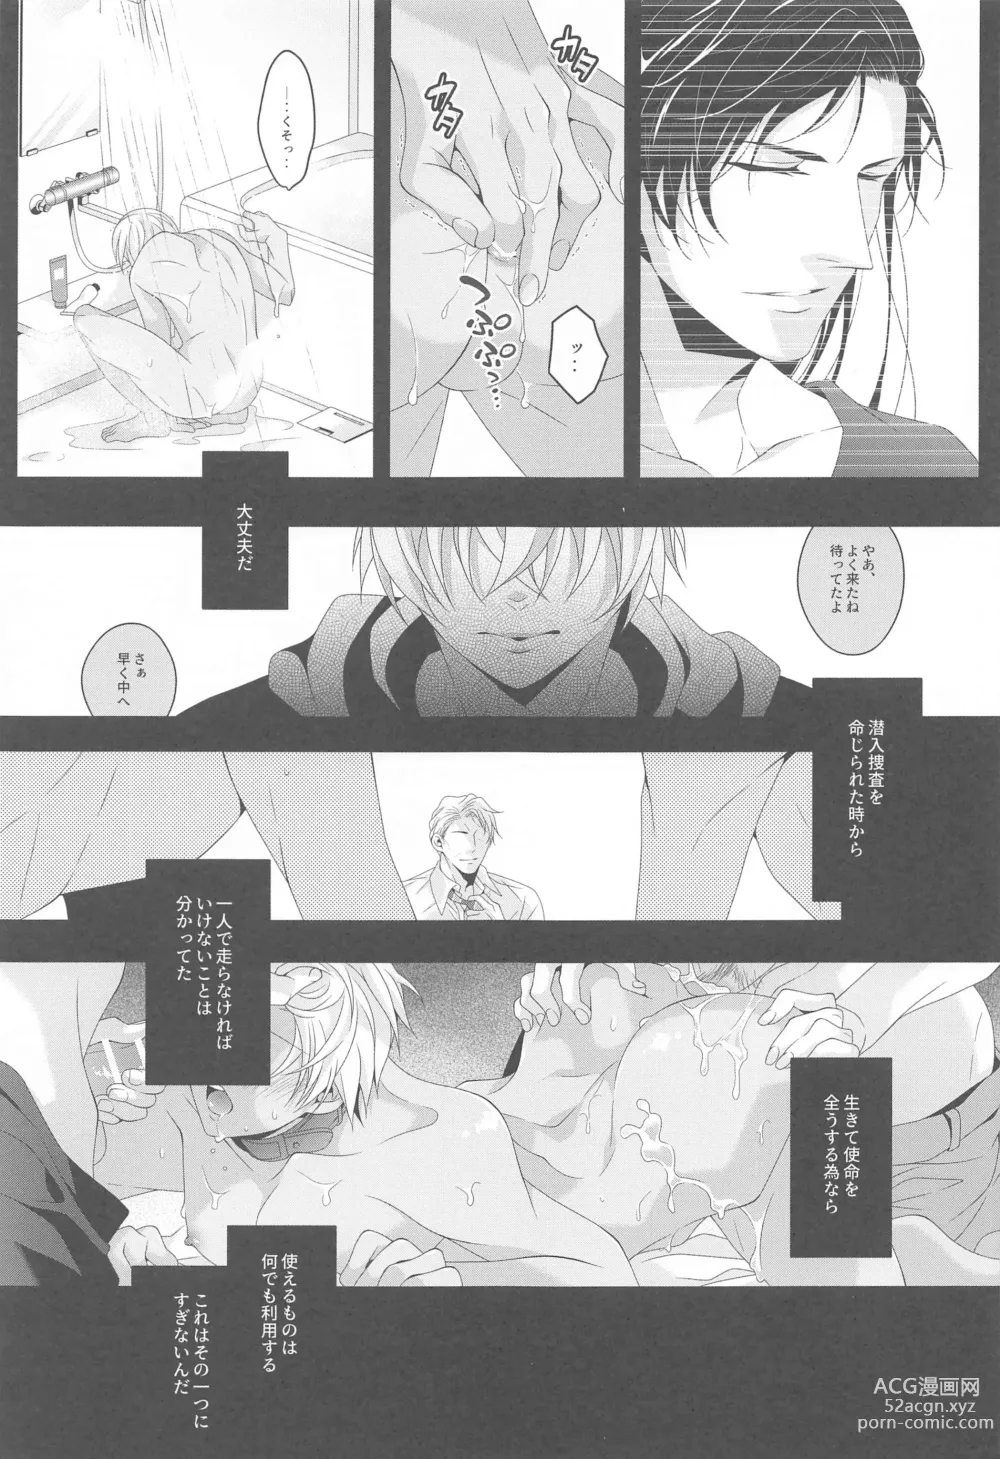 Page 20 of doujinshi Aibetsuriku no Yosame - A rainy night the pain of separation from loved ones